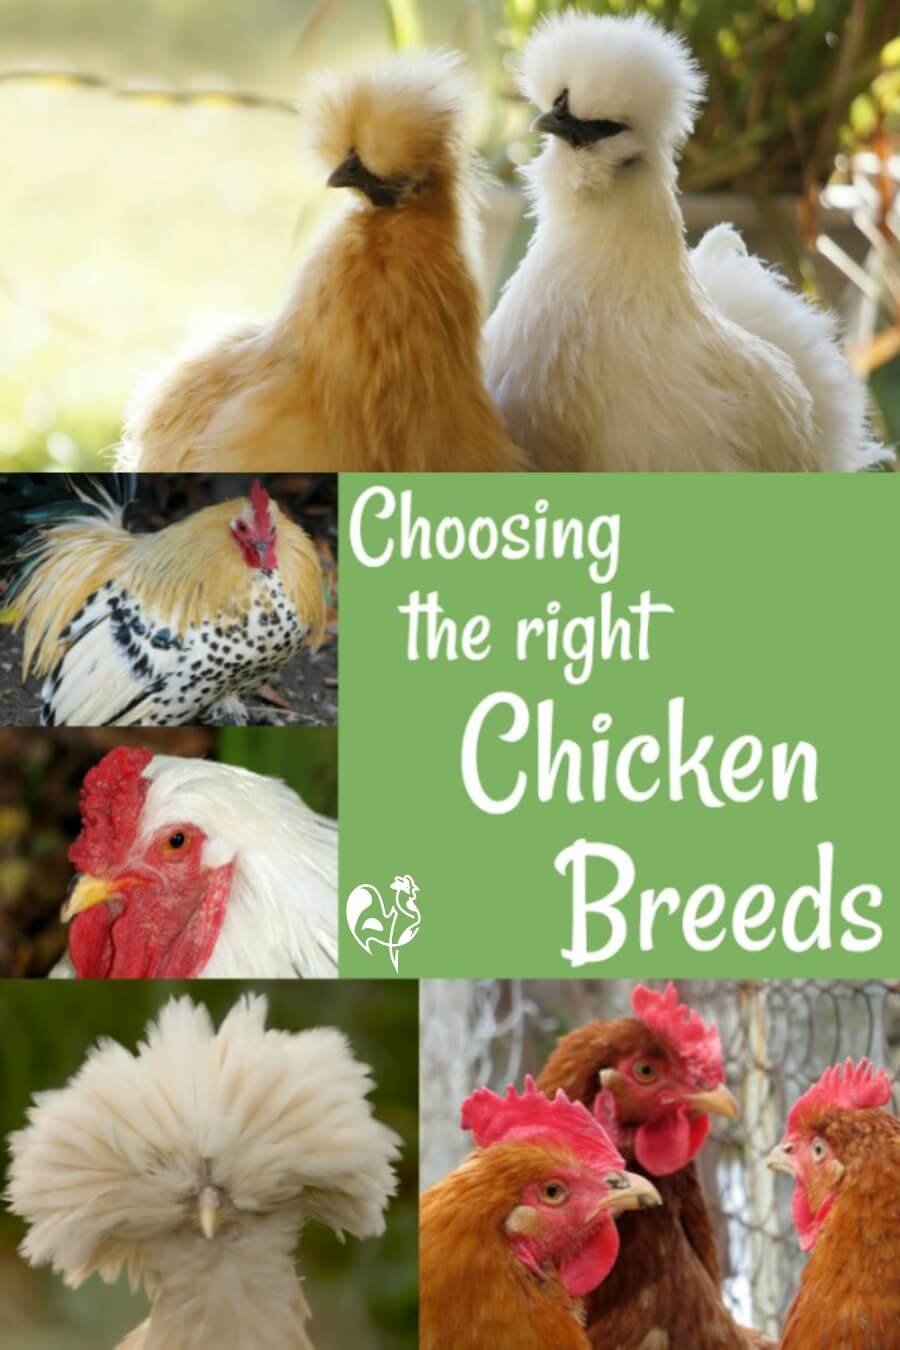 Chickens as Pets: 5 Kid-Friendly Chicken Breeds - Backyard Poultry